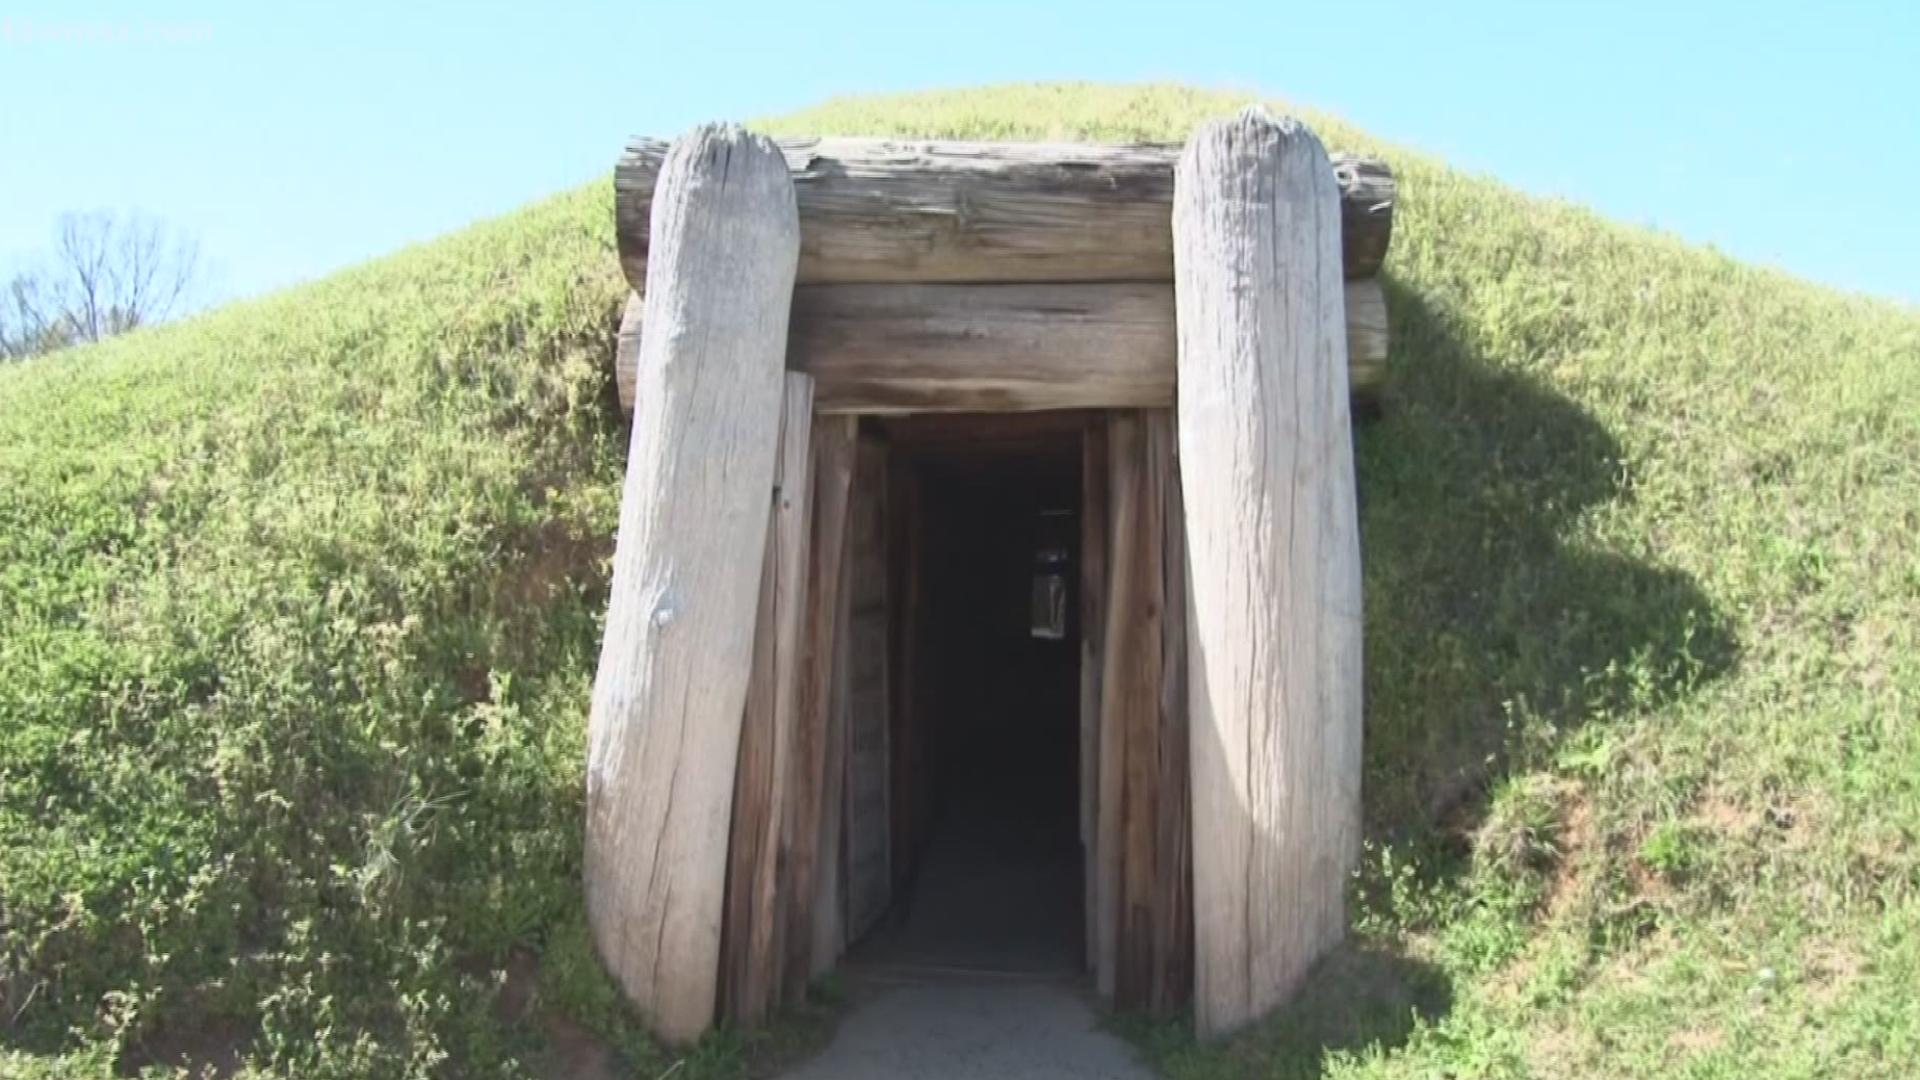 Ocmulgee Mounds National Historical Park saw a drop in visitors last year, despite being one of Macon's top attractions. Uncontrollable factors caused about a $1 million drop in visitor spending from 2017.